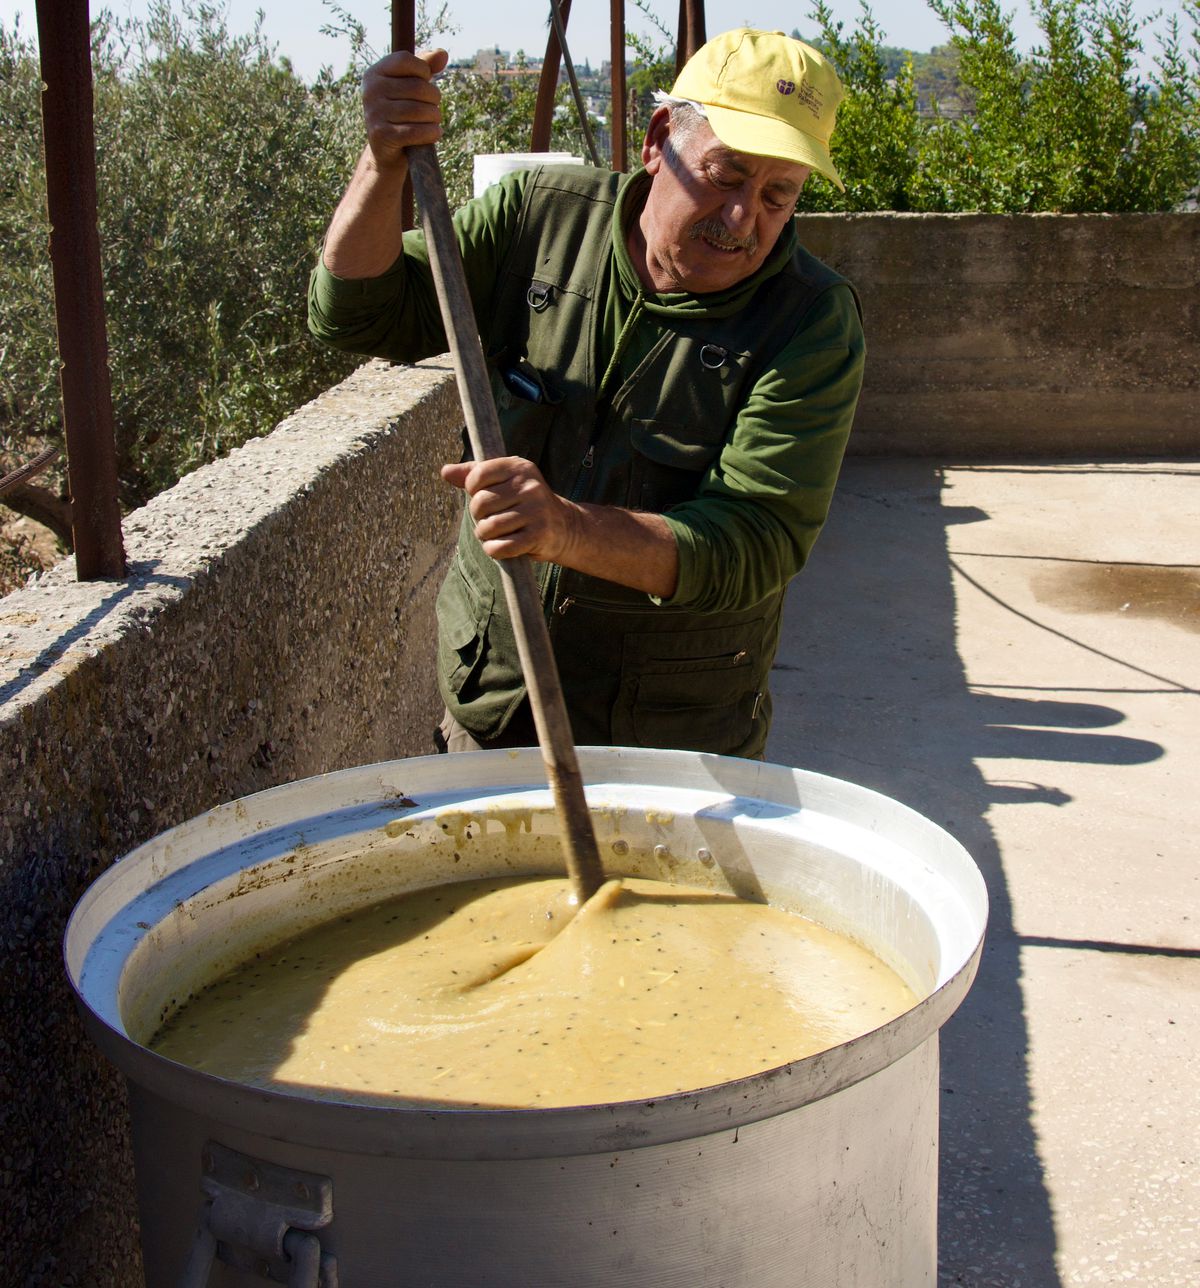 A worker stands beside a large pot stirring a yellow substance with a long pole.